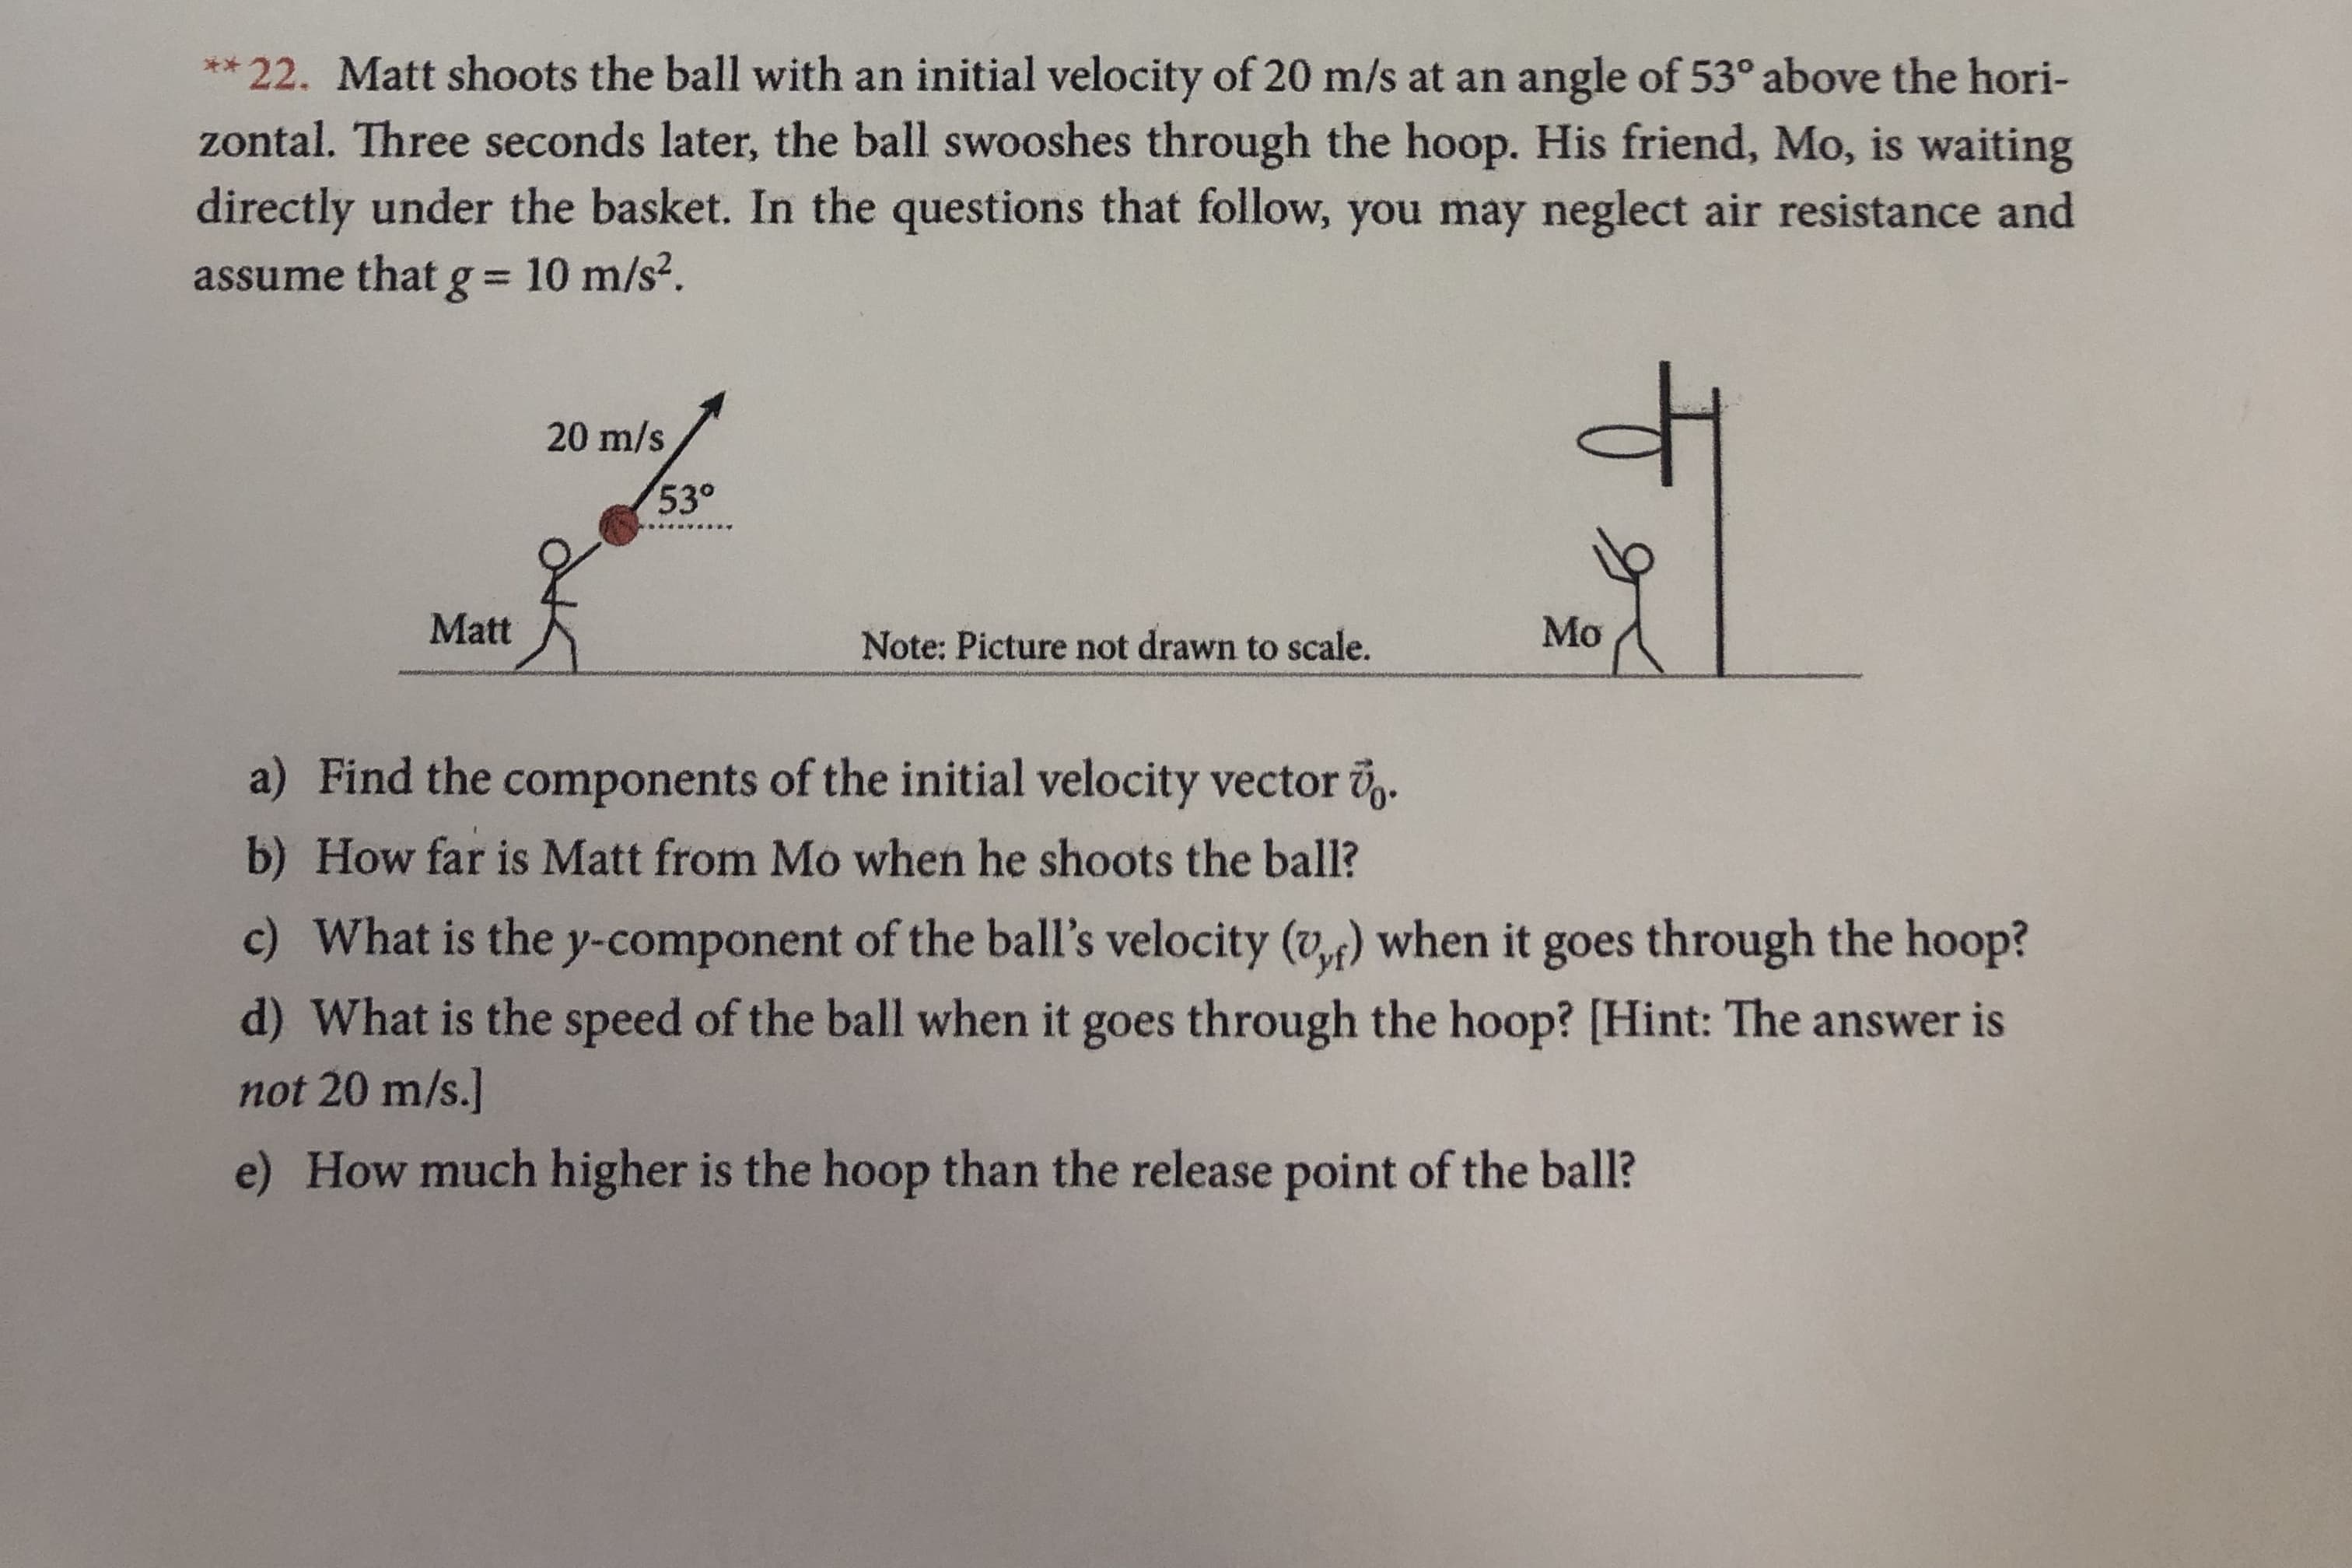 22. Matt shoots the ball with an initial velocity of 20 m/s at an
zontal. Three seconds later, the ball swooshes through the hoop. His friend, Mo, is waiting
directly under the basket. In the questions that follow, you may neglect air resistance and
**
angle of 53° above the hori-
assume that g = 10 m/s2.
20 m/s
530
Matt
Mo
Note: Picture not drawn to scale.
a) Find the components of the initial velocity vector
b) How far is Matt from Mo when he shoots the ball?
c) What is the y-component of the ball's velocity (v) when it goes through the hoop?
d) What is the speed of the ball when it goes through the hoop? [Hint: The answer is
not 20 m/s.]
e) How much higher is the hoop than the release point of the ball?
